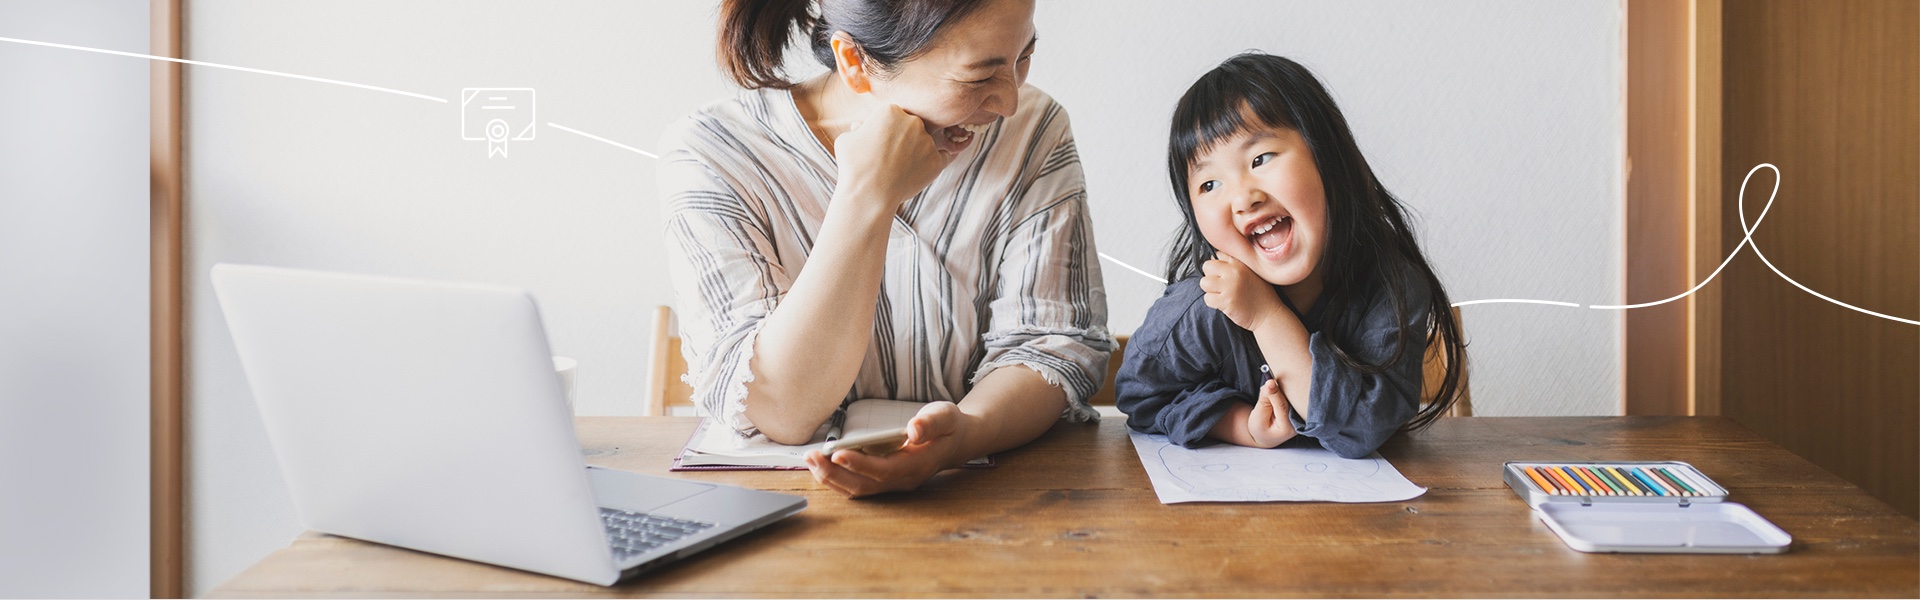 Little Girl and mom smiling while doing homework together at the table